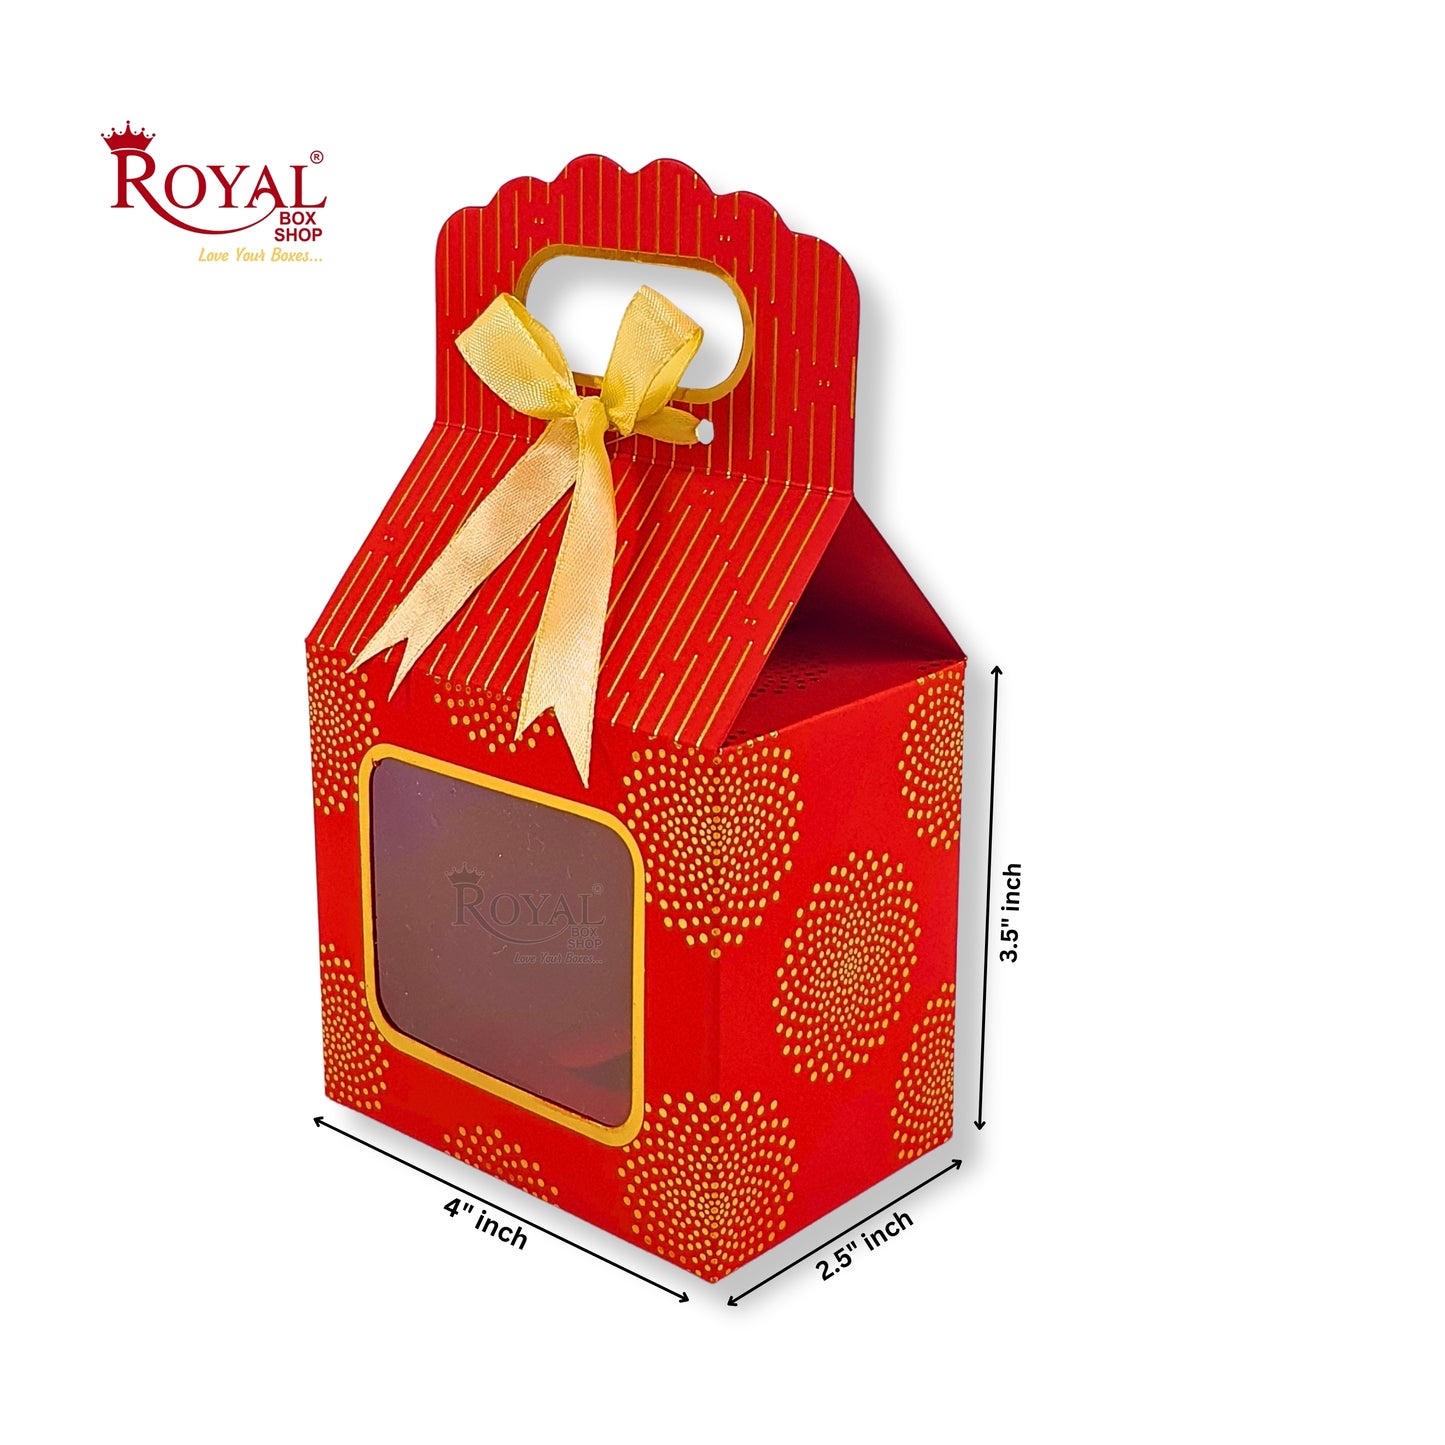 Premium Gift Box with Window I Red Gold Leaf Print I 4x2.5x3.5 inches I For Return Favor Gift, Baby Shower Gifts, Room Hampers, Candy Box, Birthday Return Gift